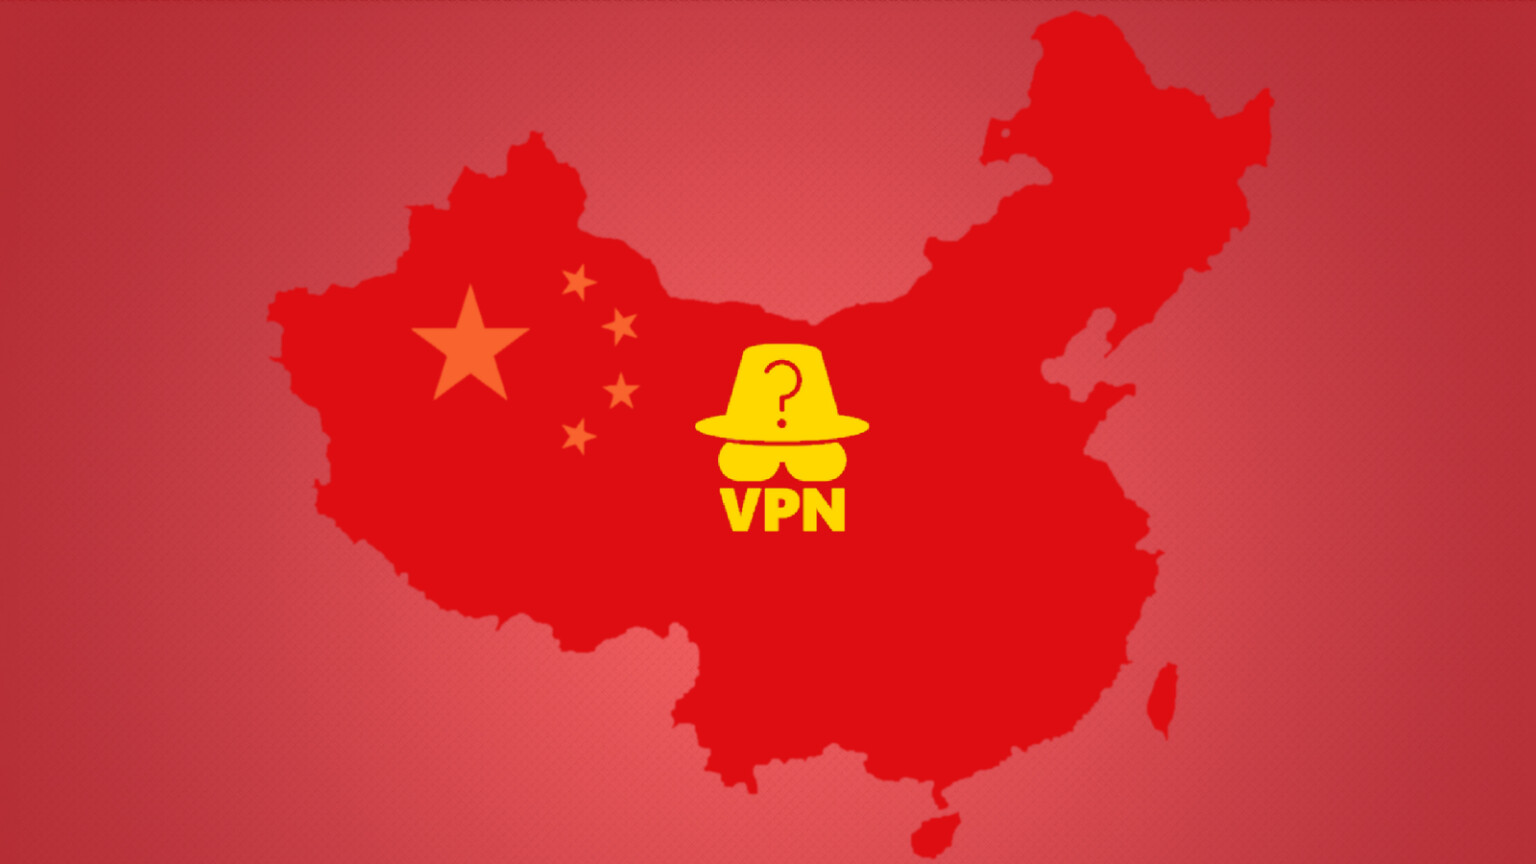 best mac vpn for china